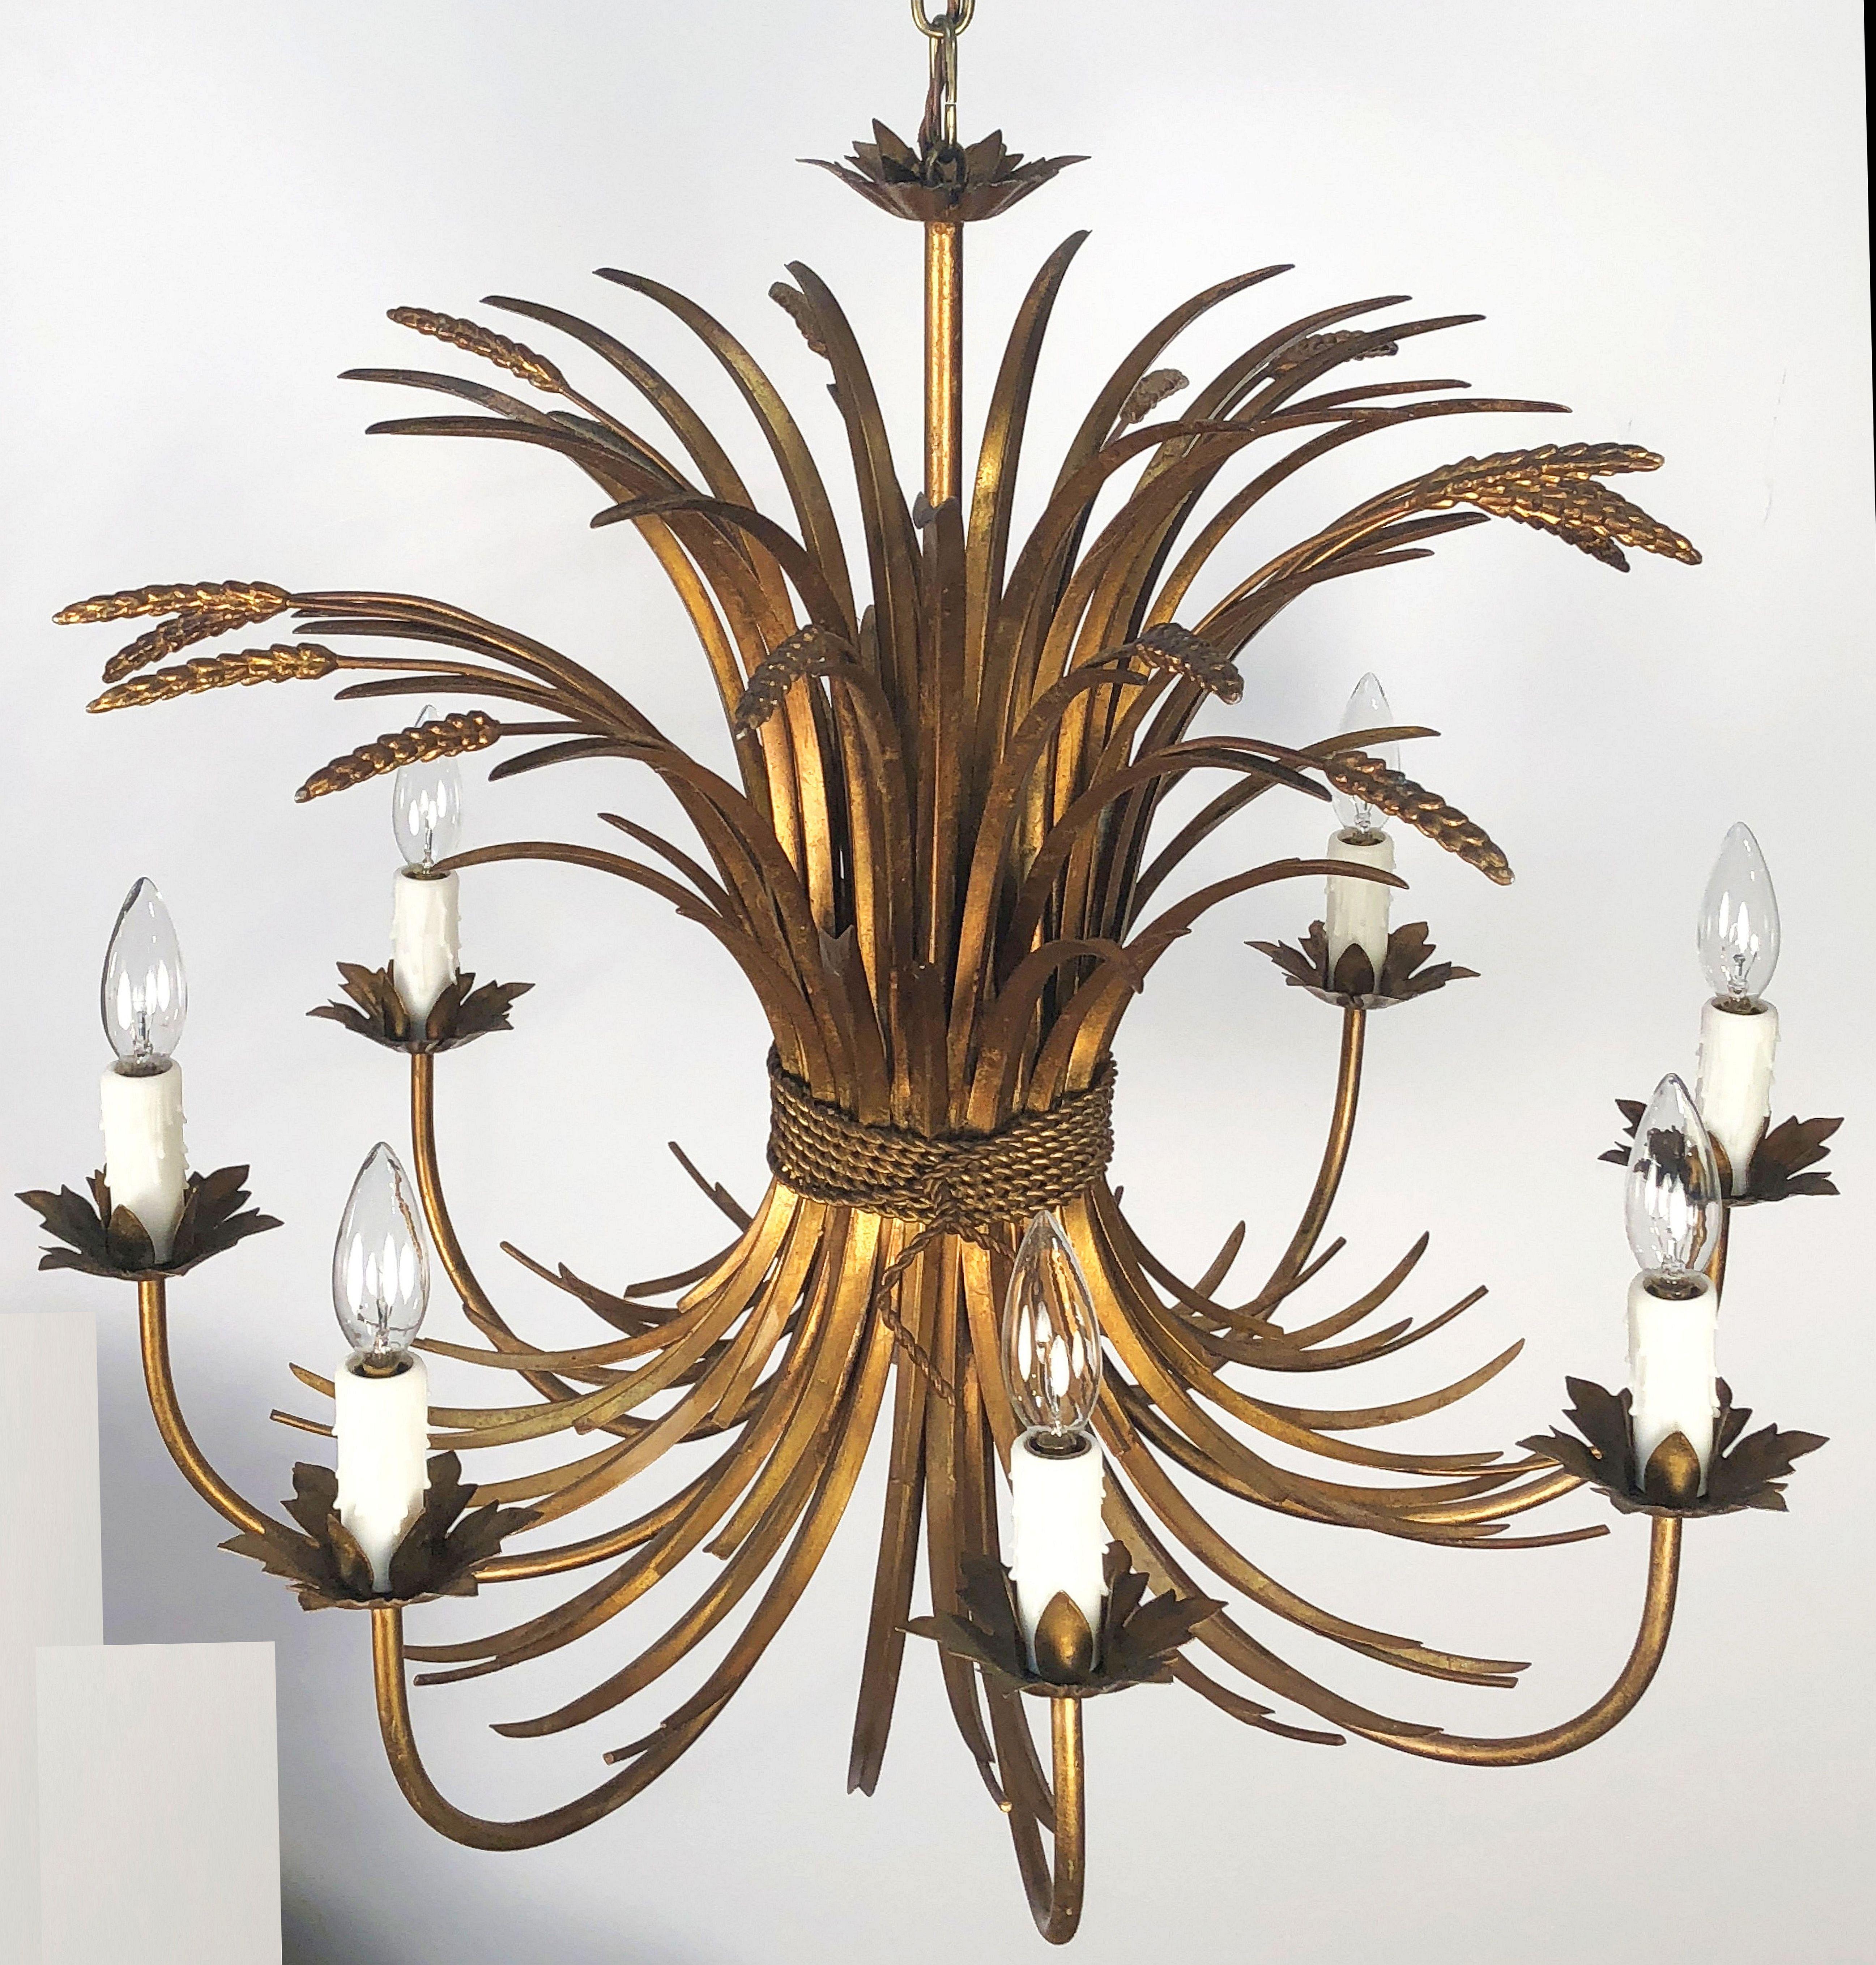 A handsome Italian eight-light hanging light fixture or chandelier or pendant light of gilt metal featuring a wheat sheaf (wheatsheaf) design, with floral bobeches and lovely foliate scroll accents.

Measures: 28 1/2 inches diameter

U.S. wired,